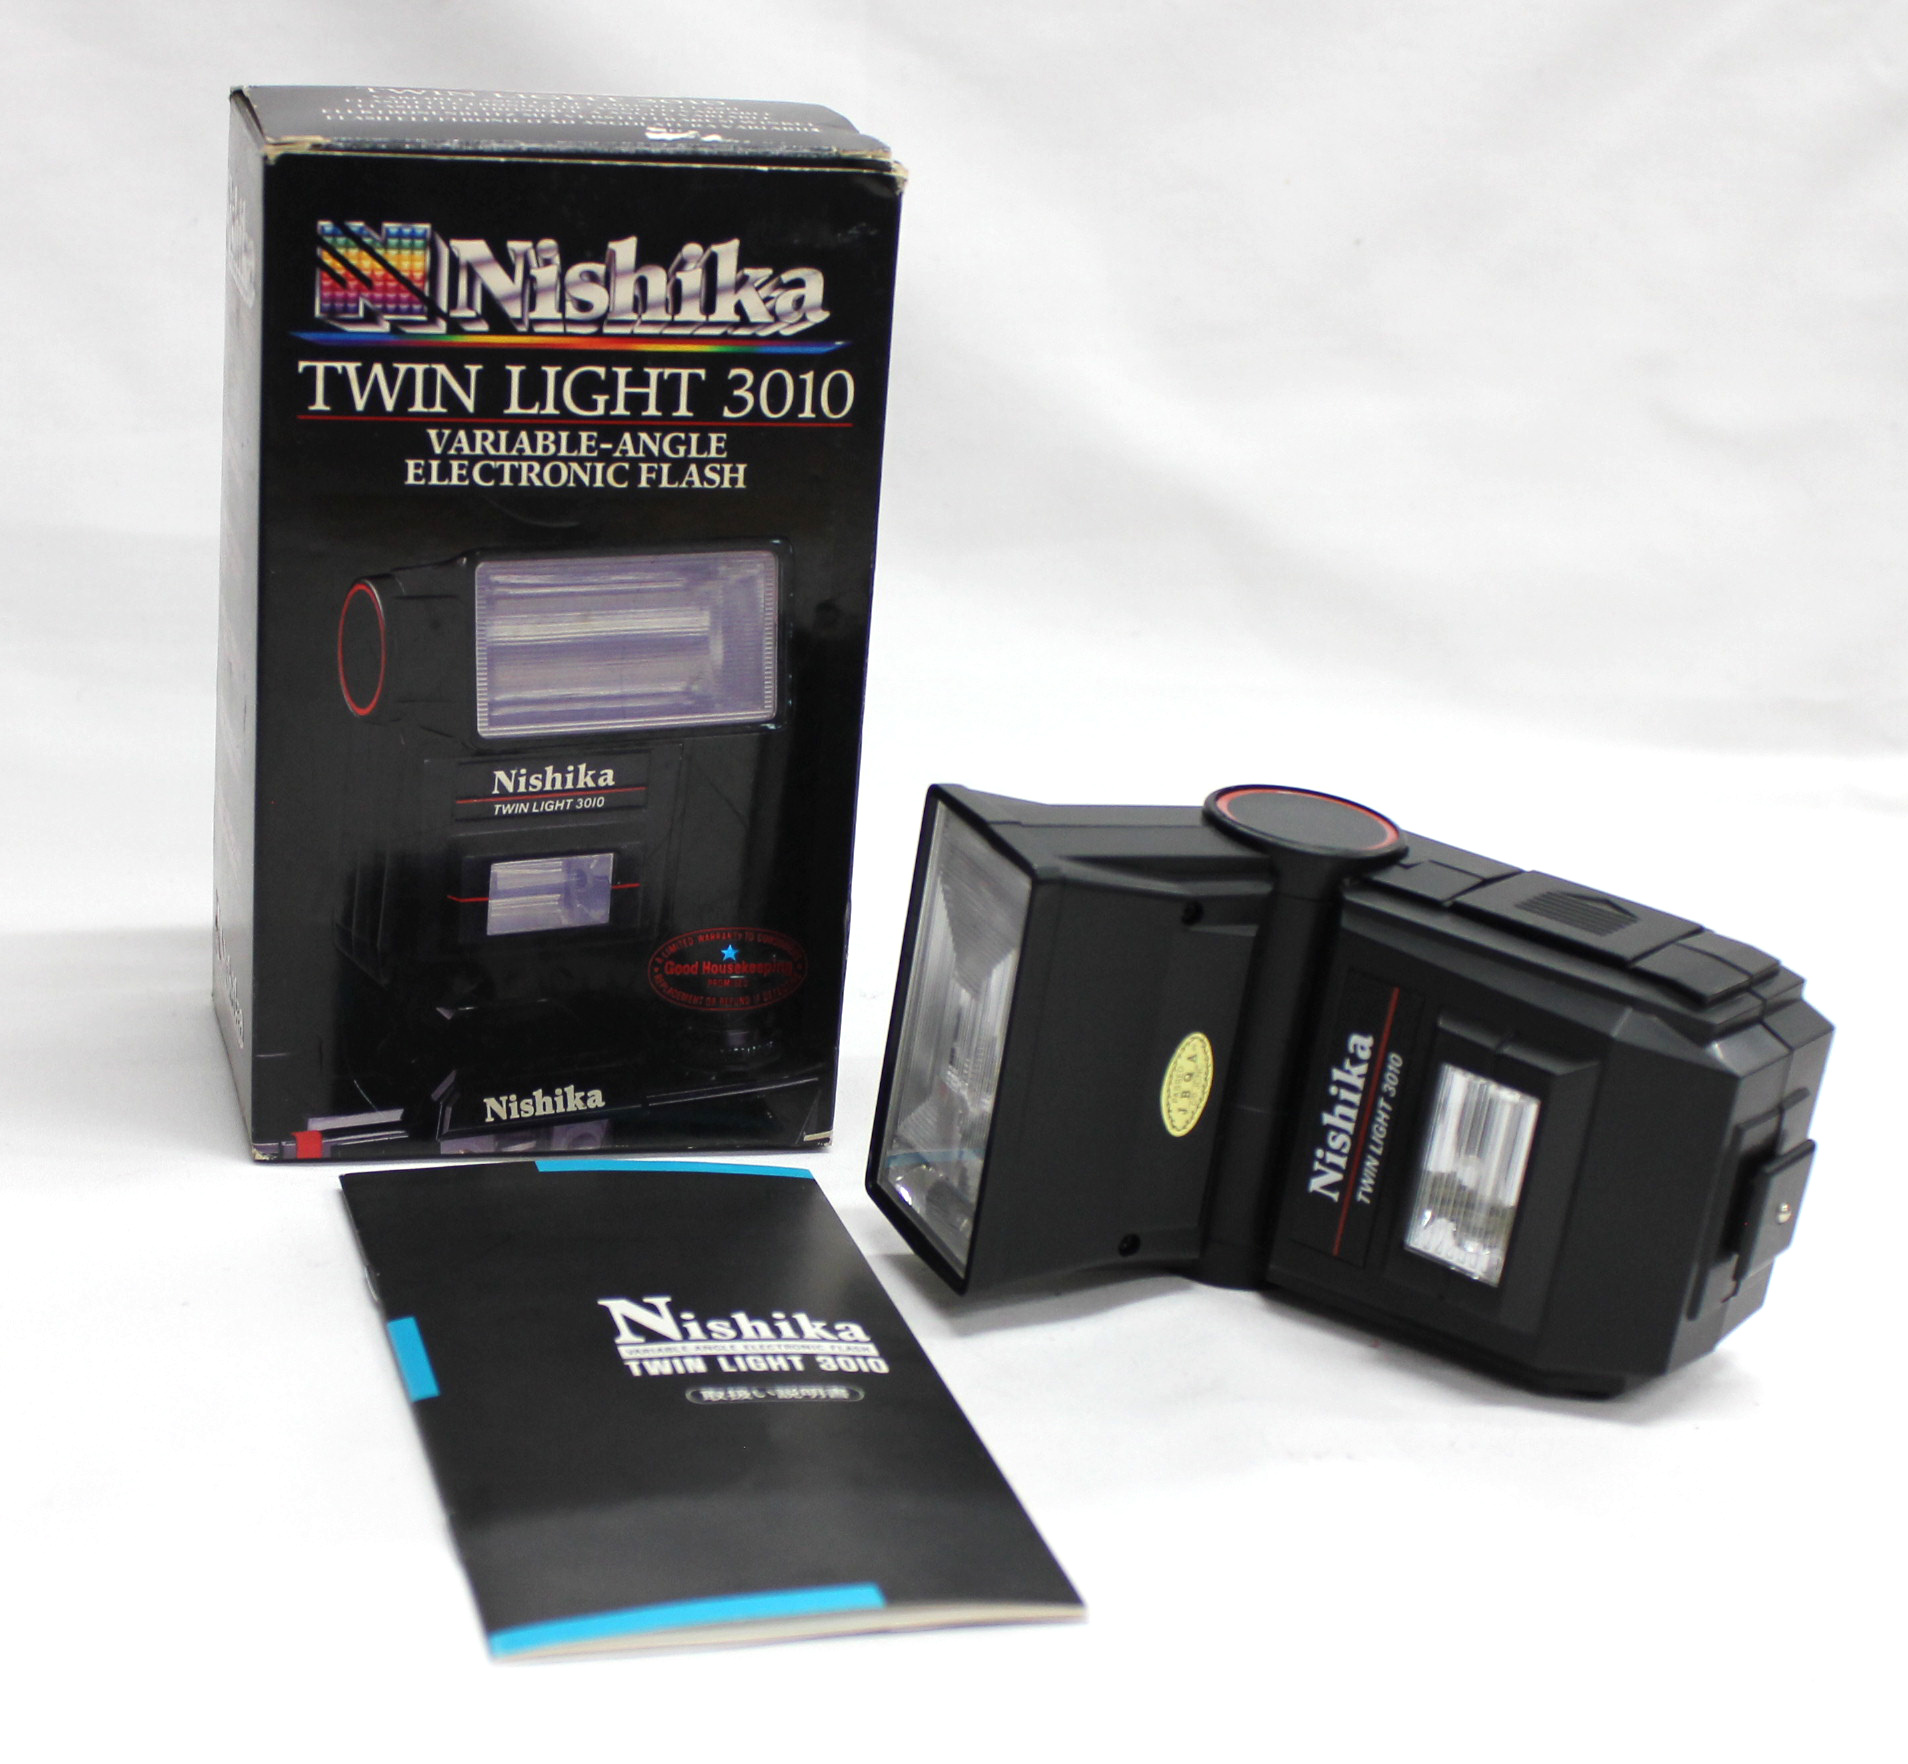 Japan Used Camera Shop | [Ex+5 in Box] Nishika Twin Light 3010 Electronic Flash for N8000 3-D Camera from Japan